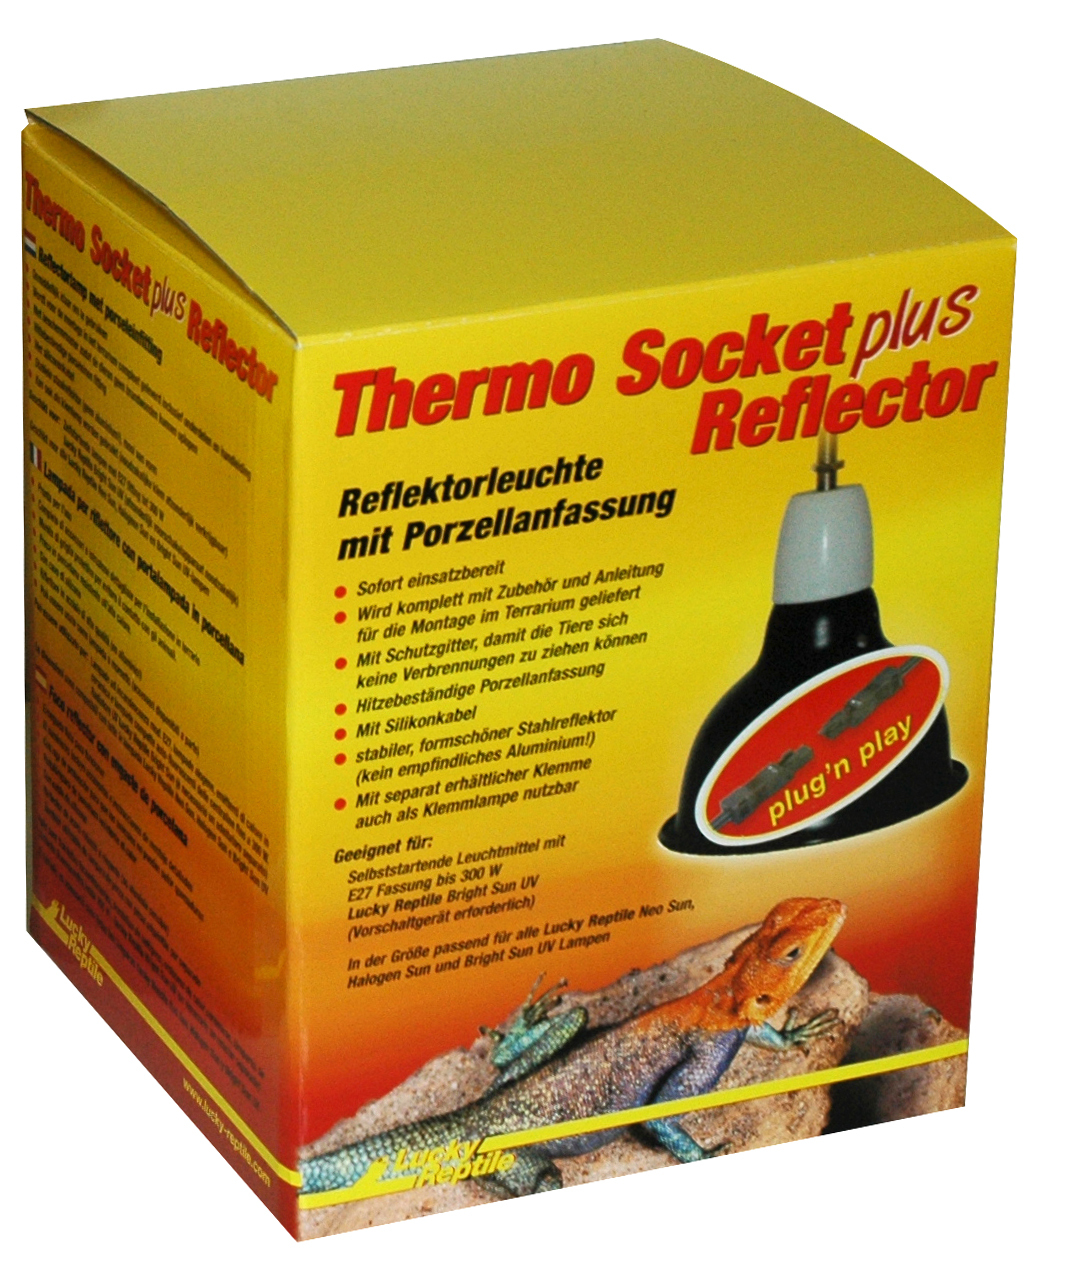 Peter Hoch Thermo Socket mit Reflector PRO